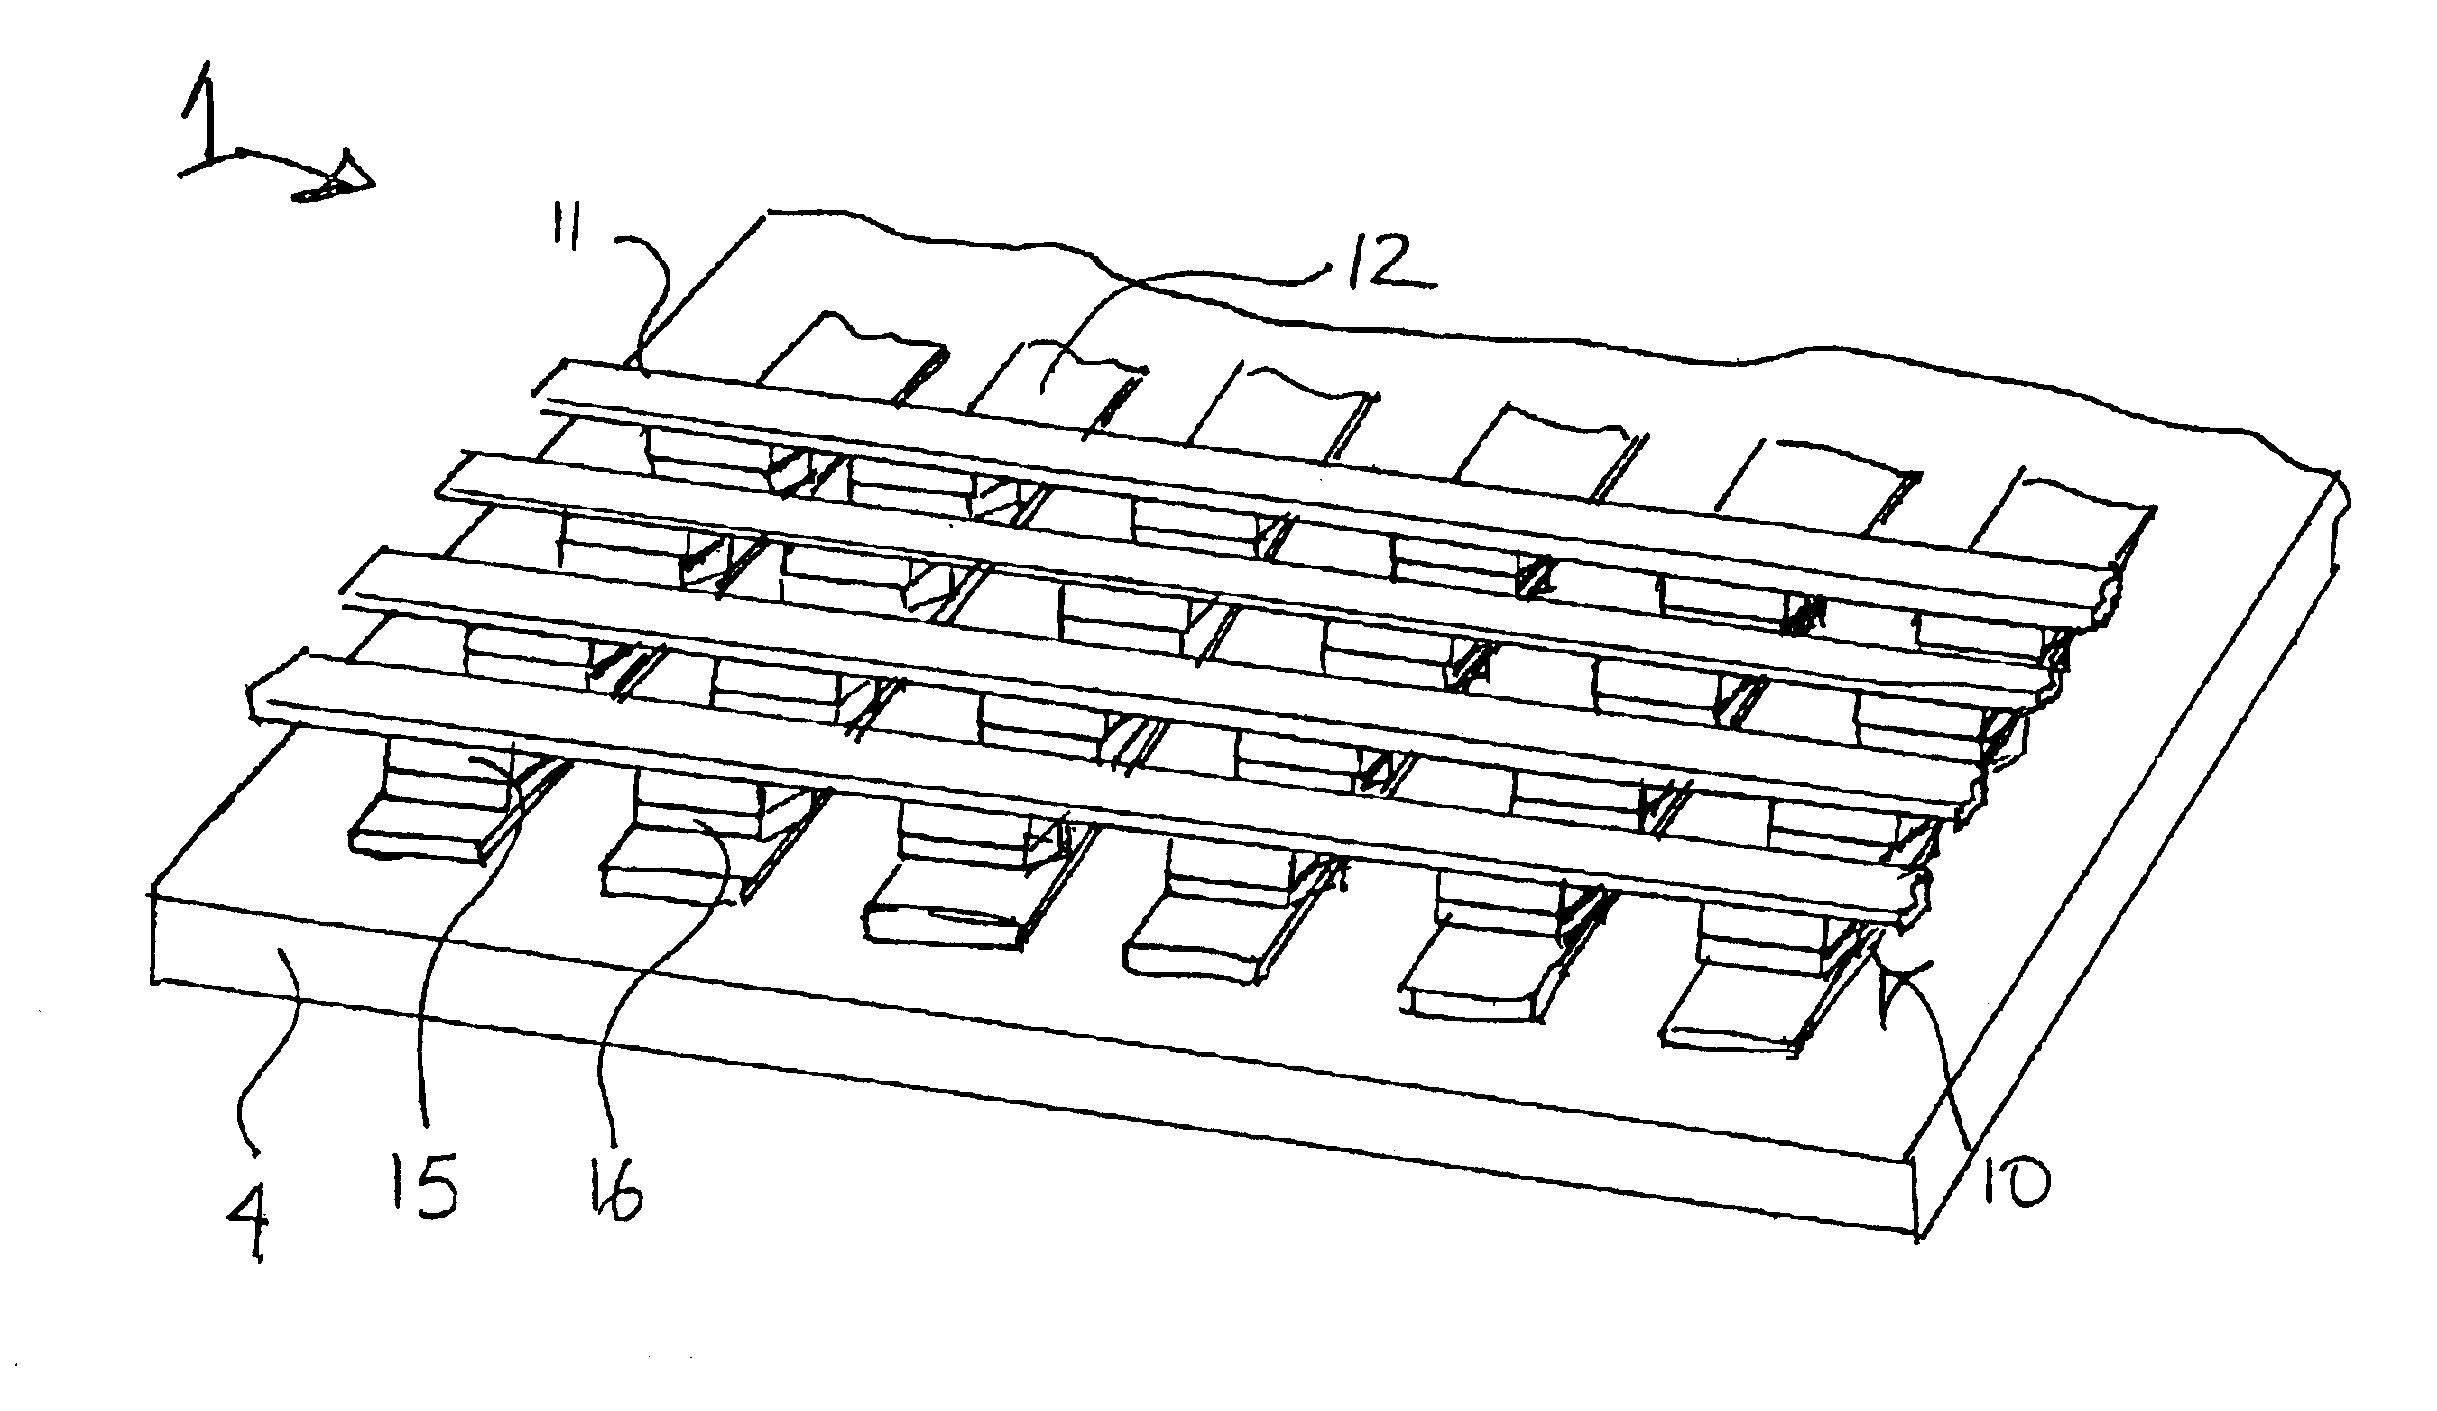 Memory device with active and passive layers